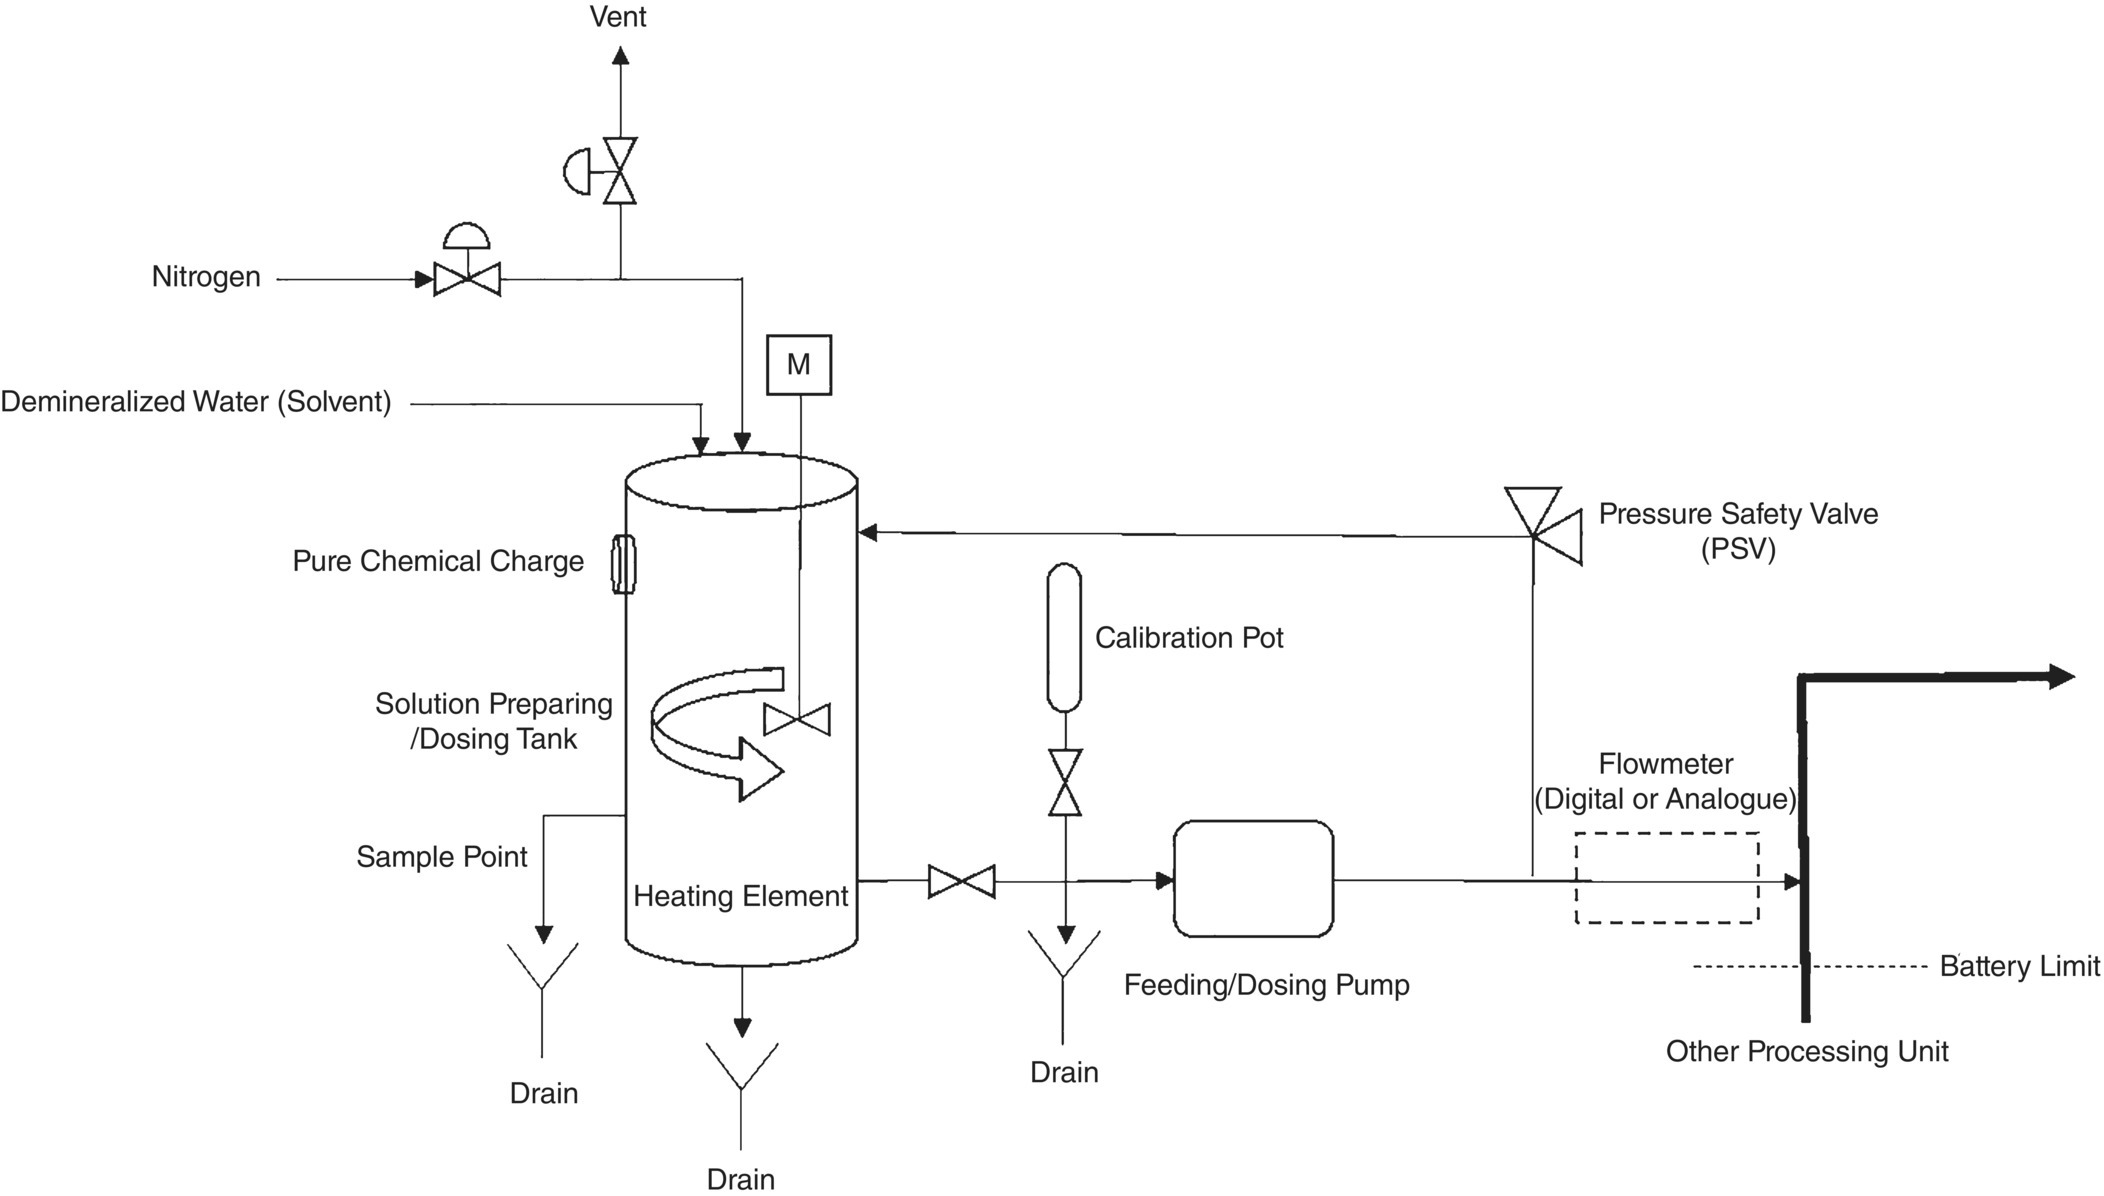 Schematic illustration of a liquid chemical feed package and its minimum requirement.